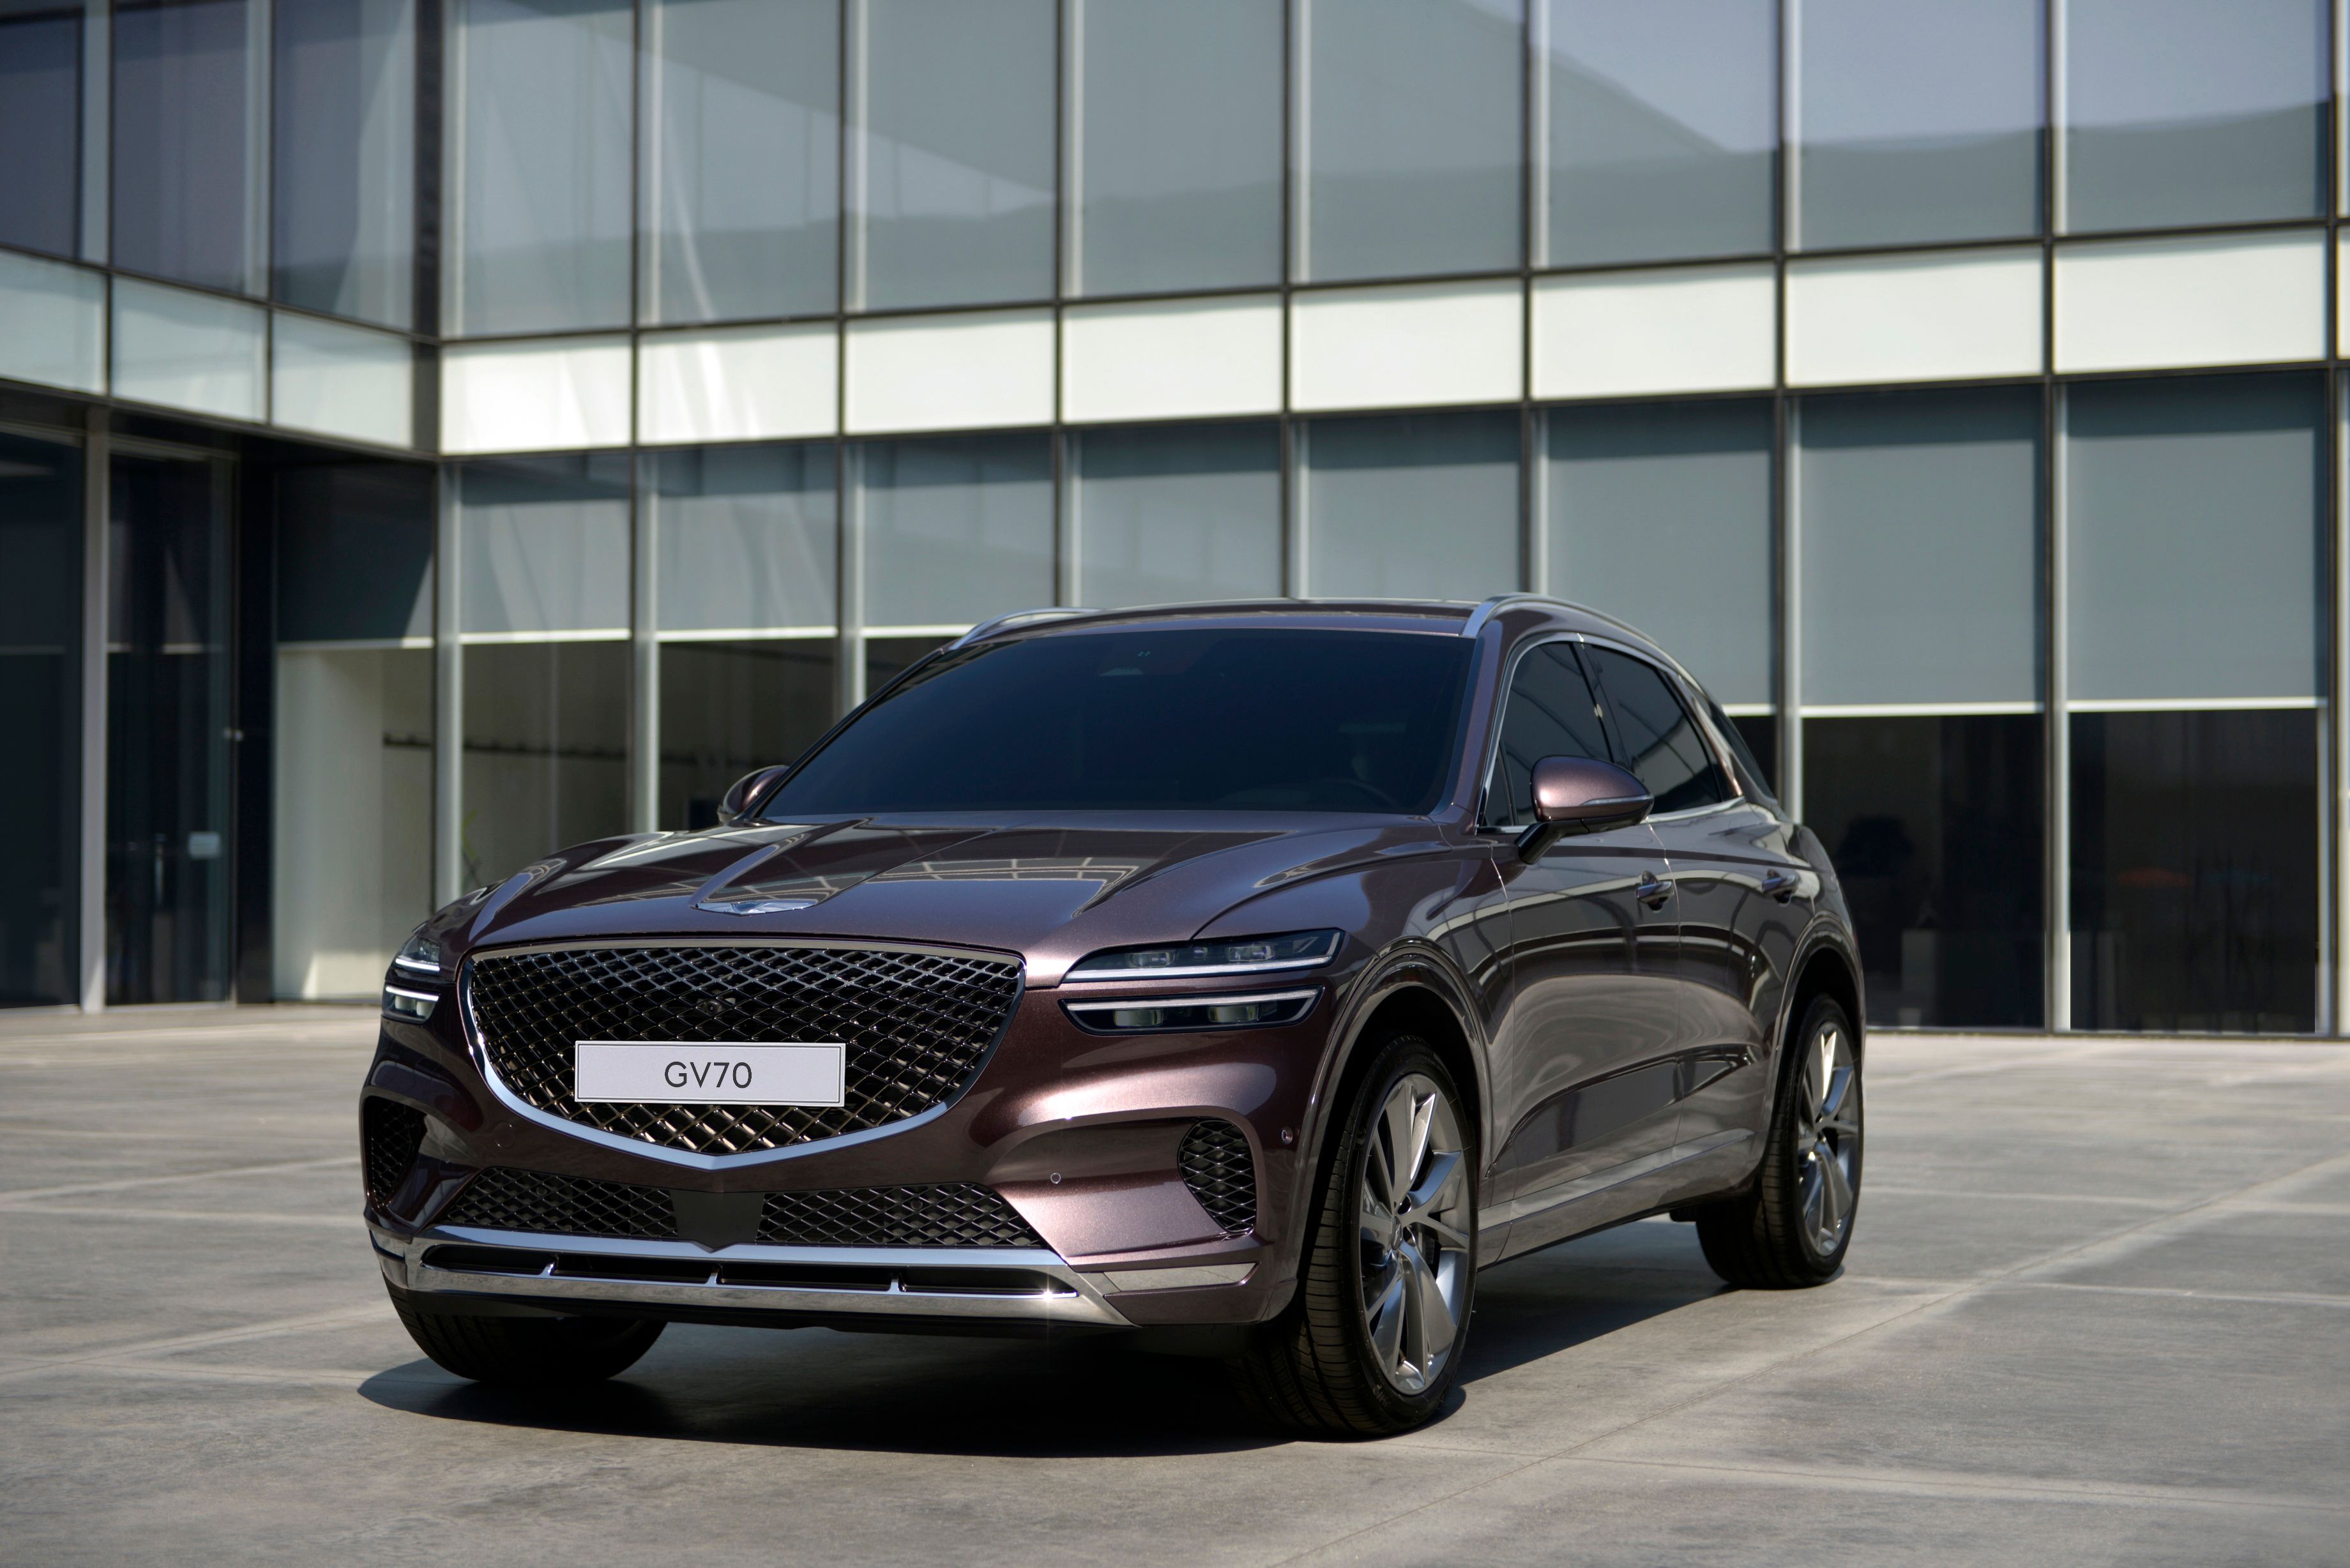 2020 The Genesis GV70 Comes to Take Its Piece of the Compact SUV Segment